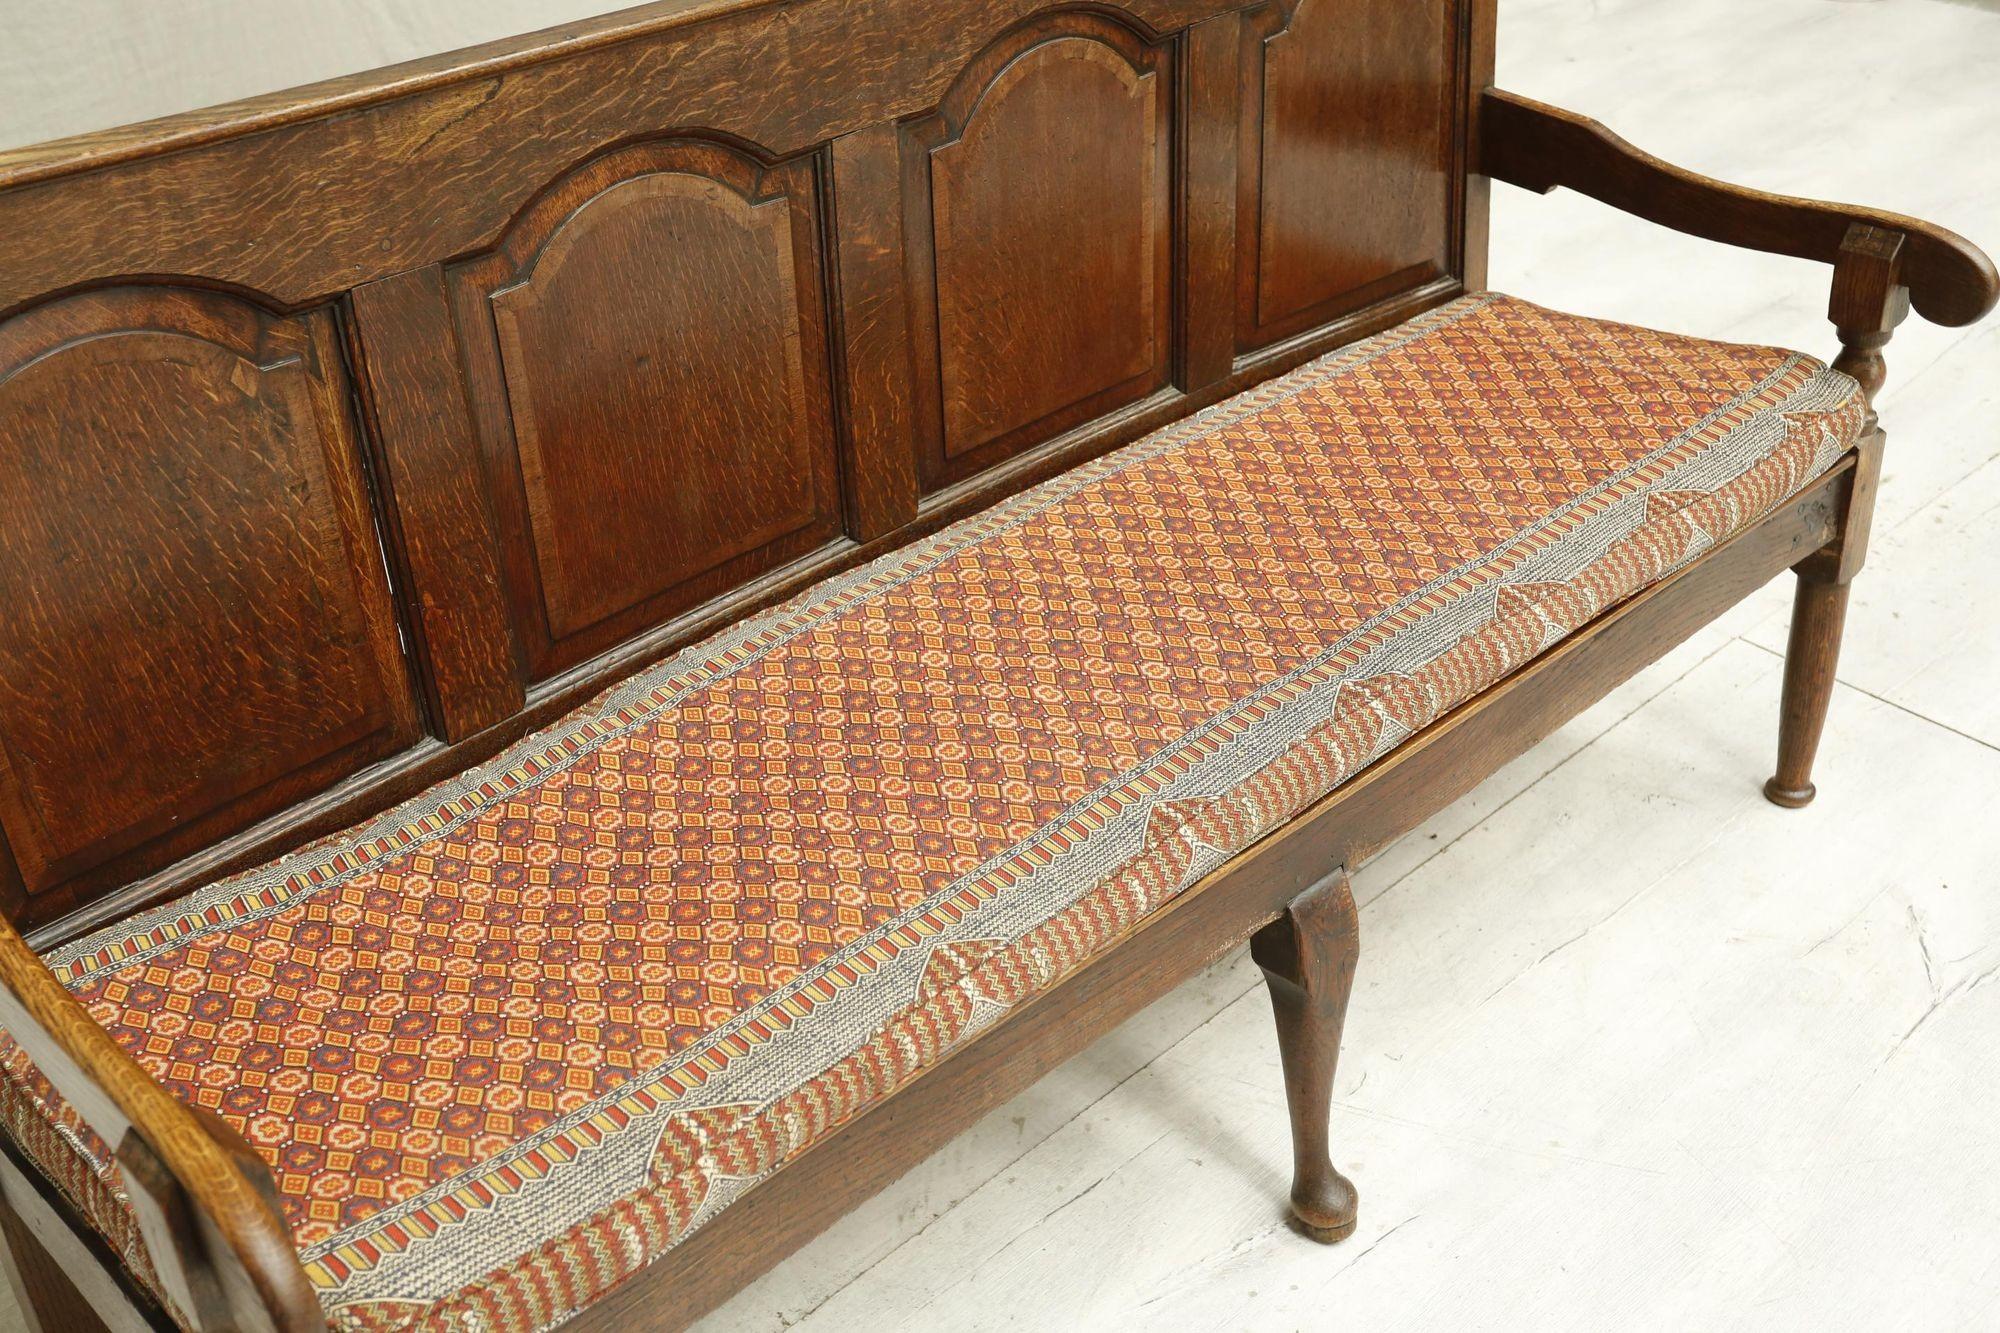 18th Century and Earlier 18th Century Oak Settle with Kilim Seat Cushion